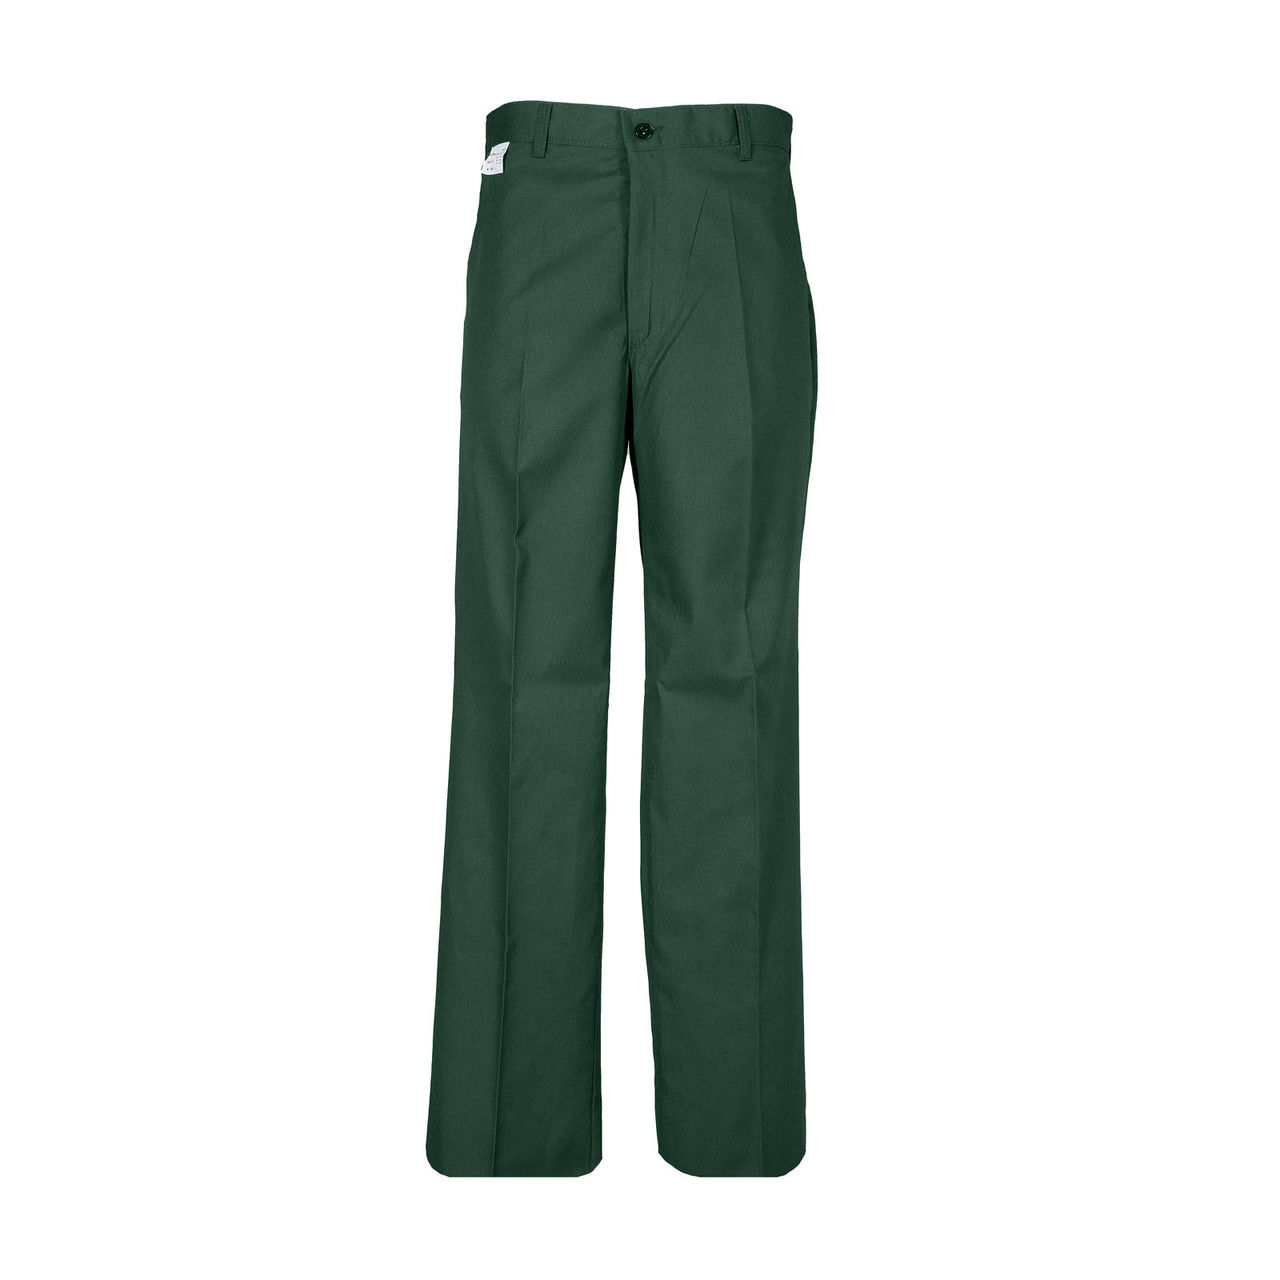 Can green work pants be returned if customized?